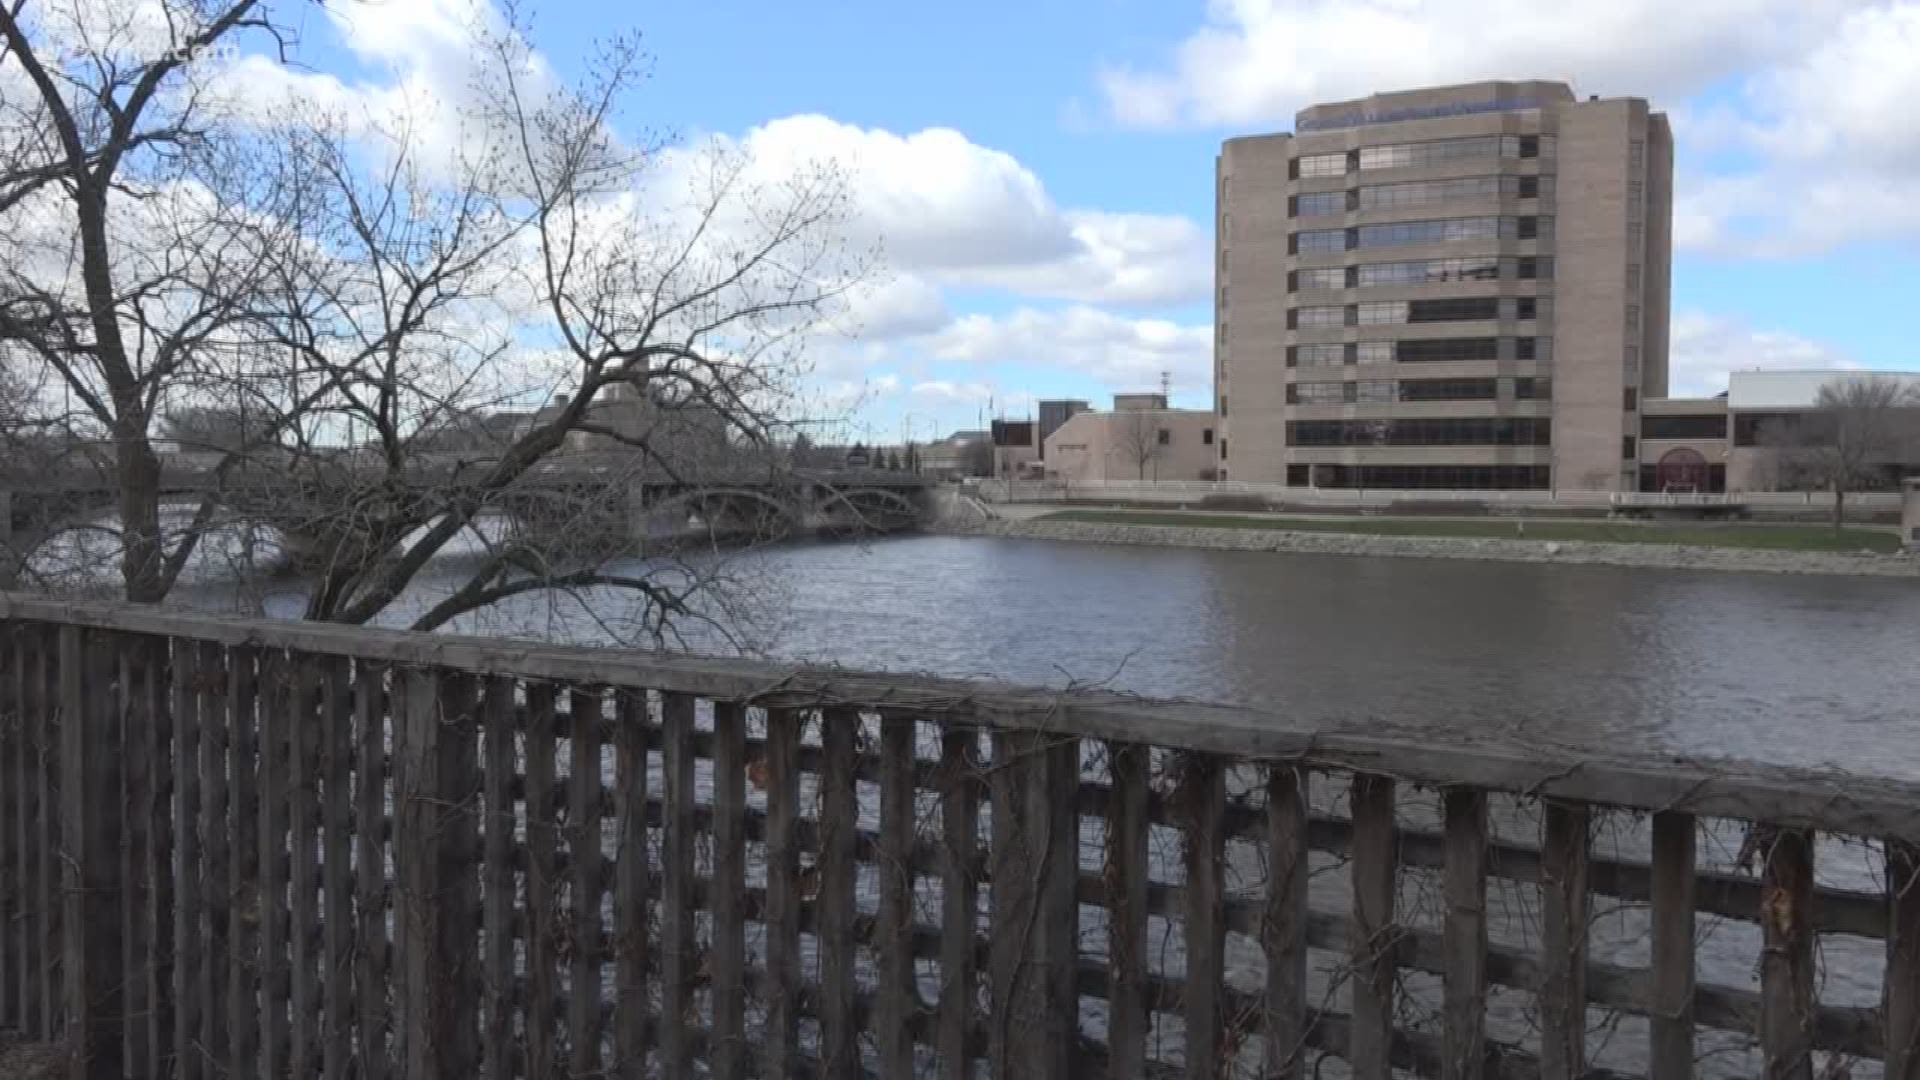 The project would carve out a portion of the Grand River to make way for recreational boating.